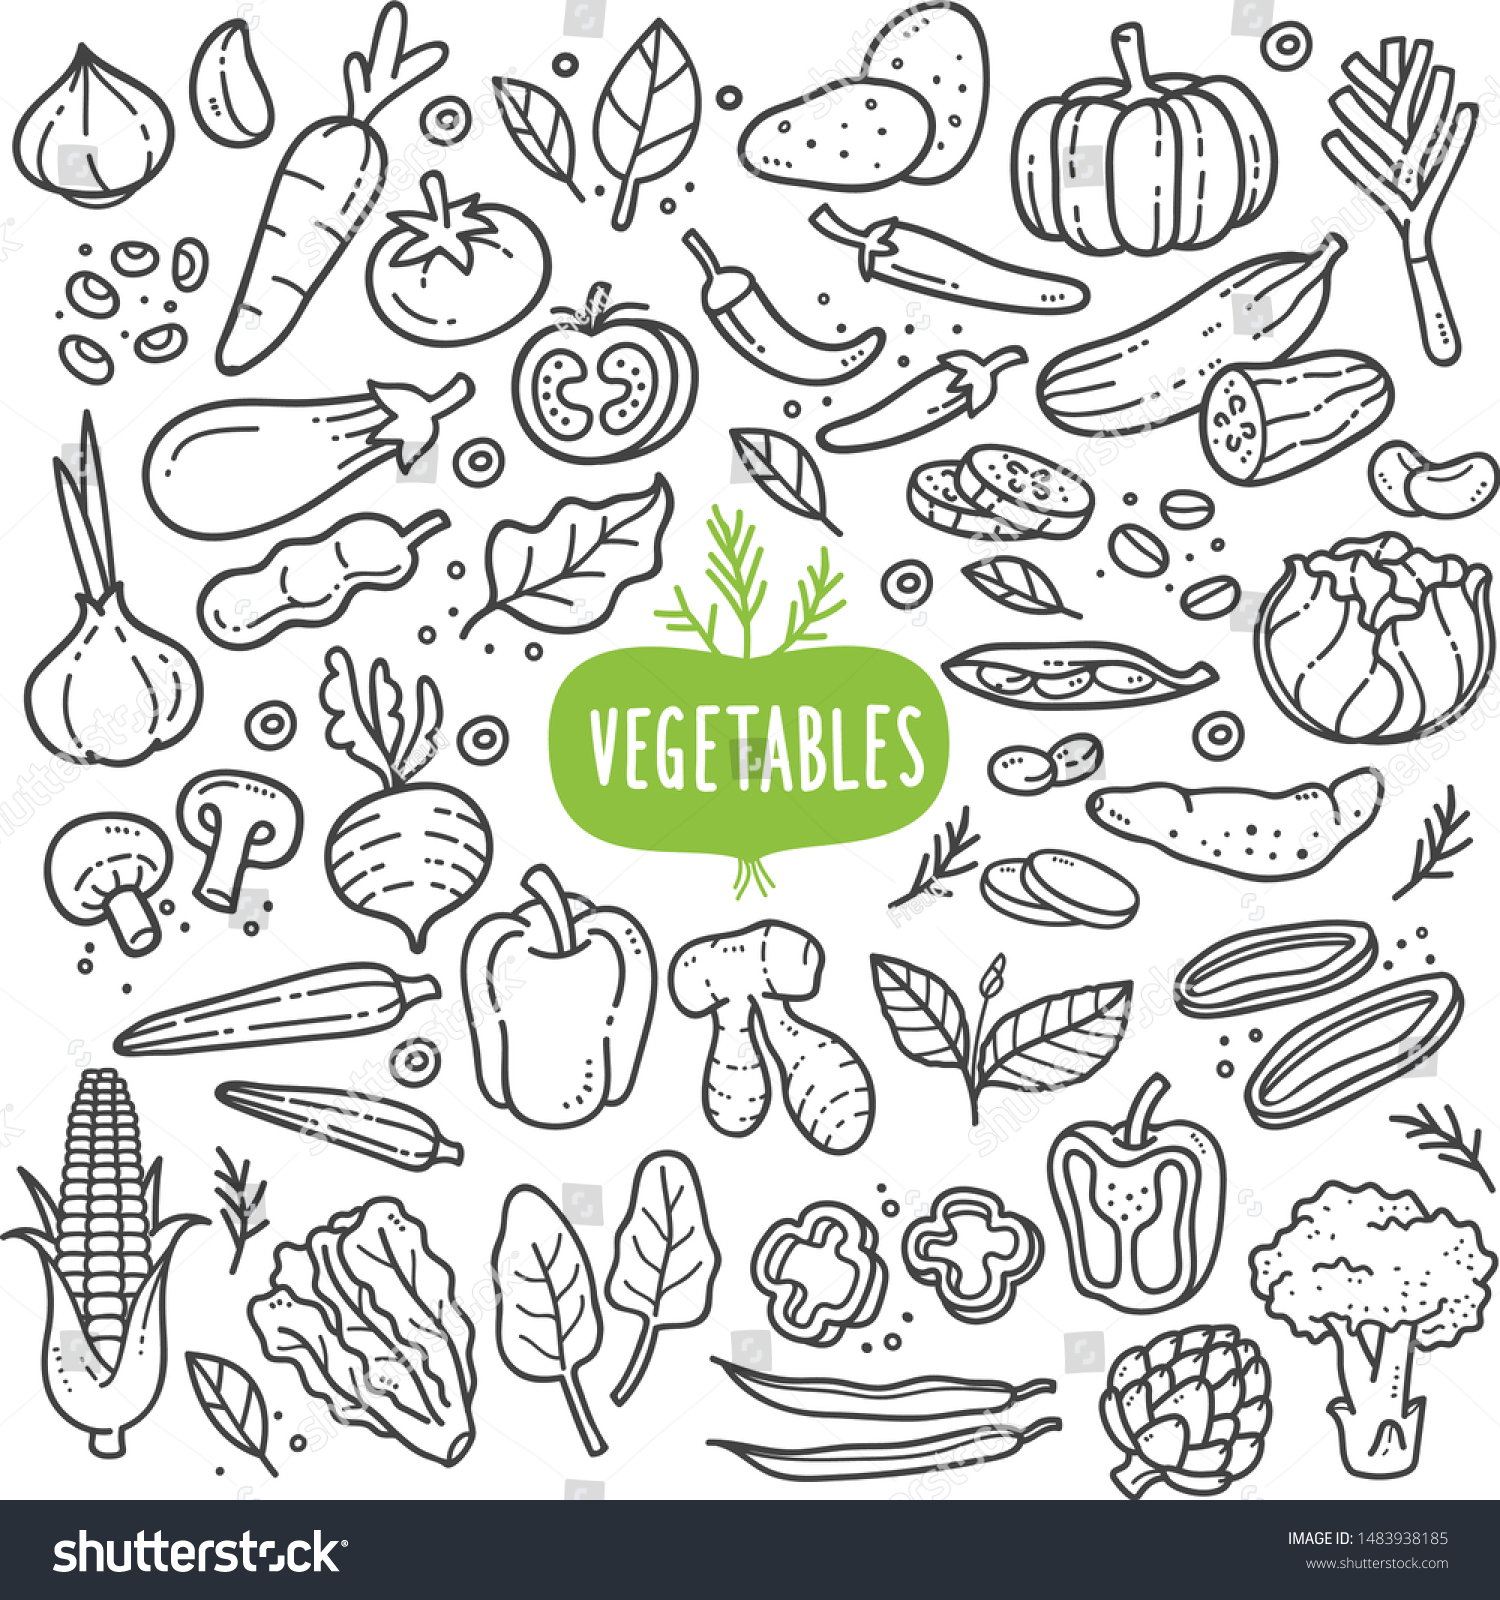 Vegetables doodle drawing collection. vegetable such as carrot, corn, ginger, mushroom, cucumber, cabbage, potato, etc. Hand drawn vector doodle illustrations in black isolated over white background. #1483938185